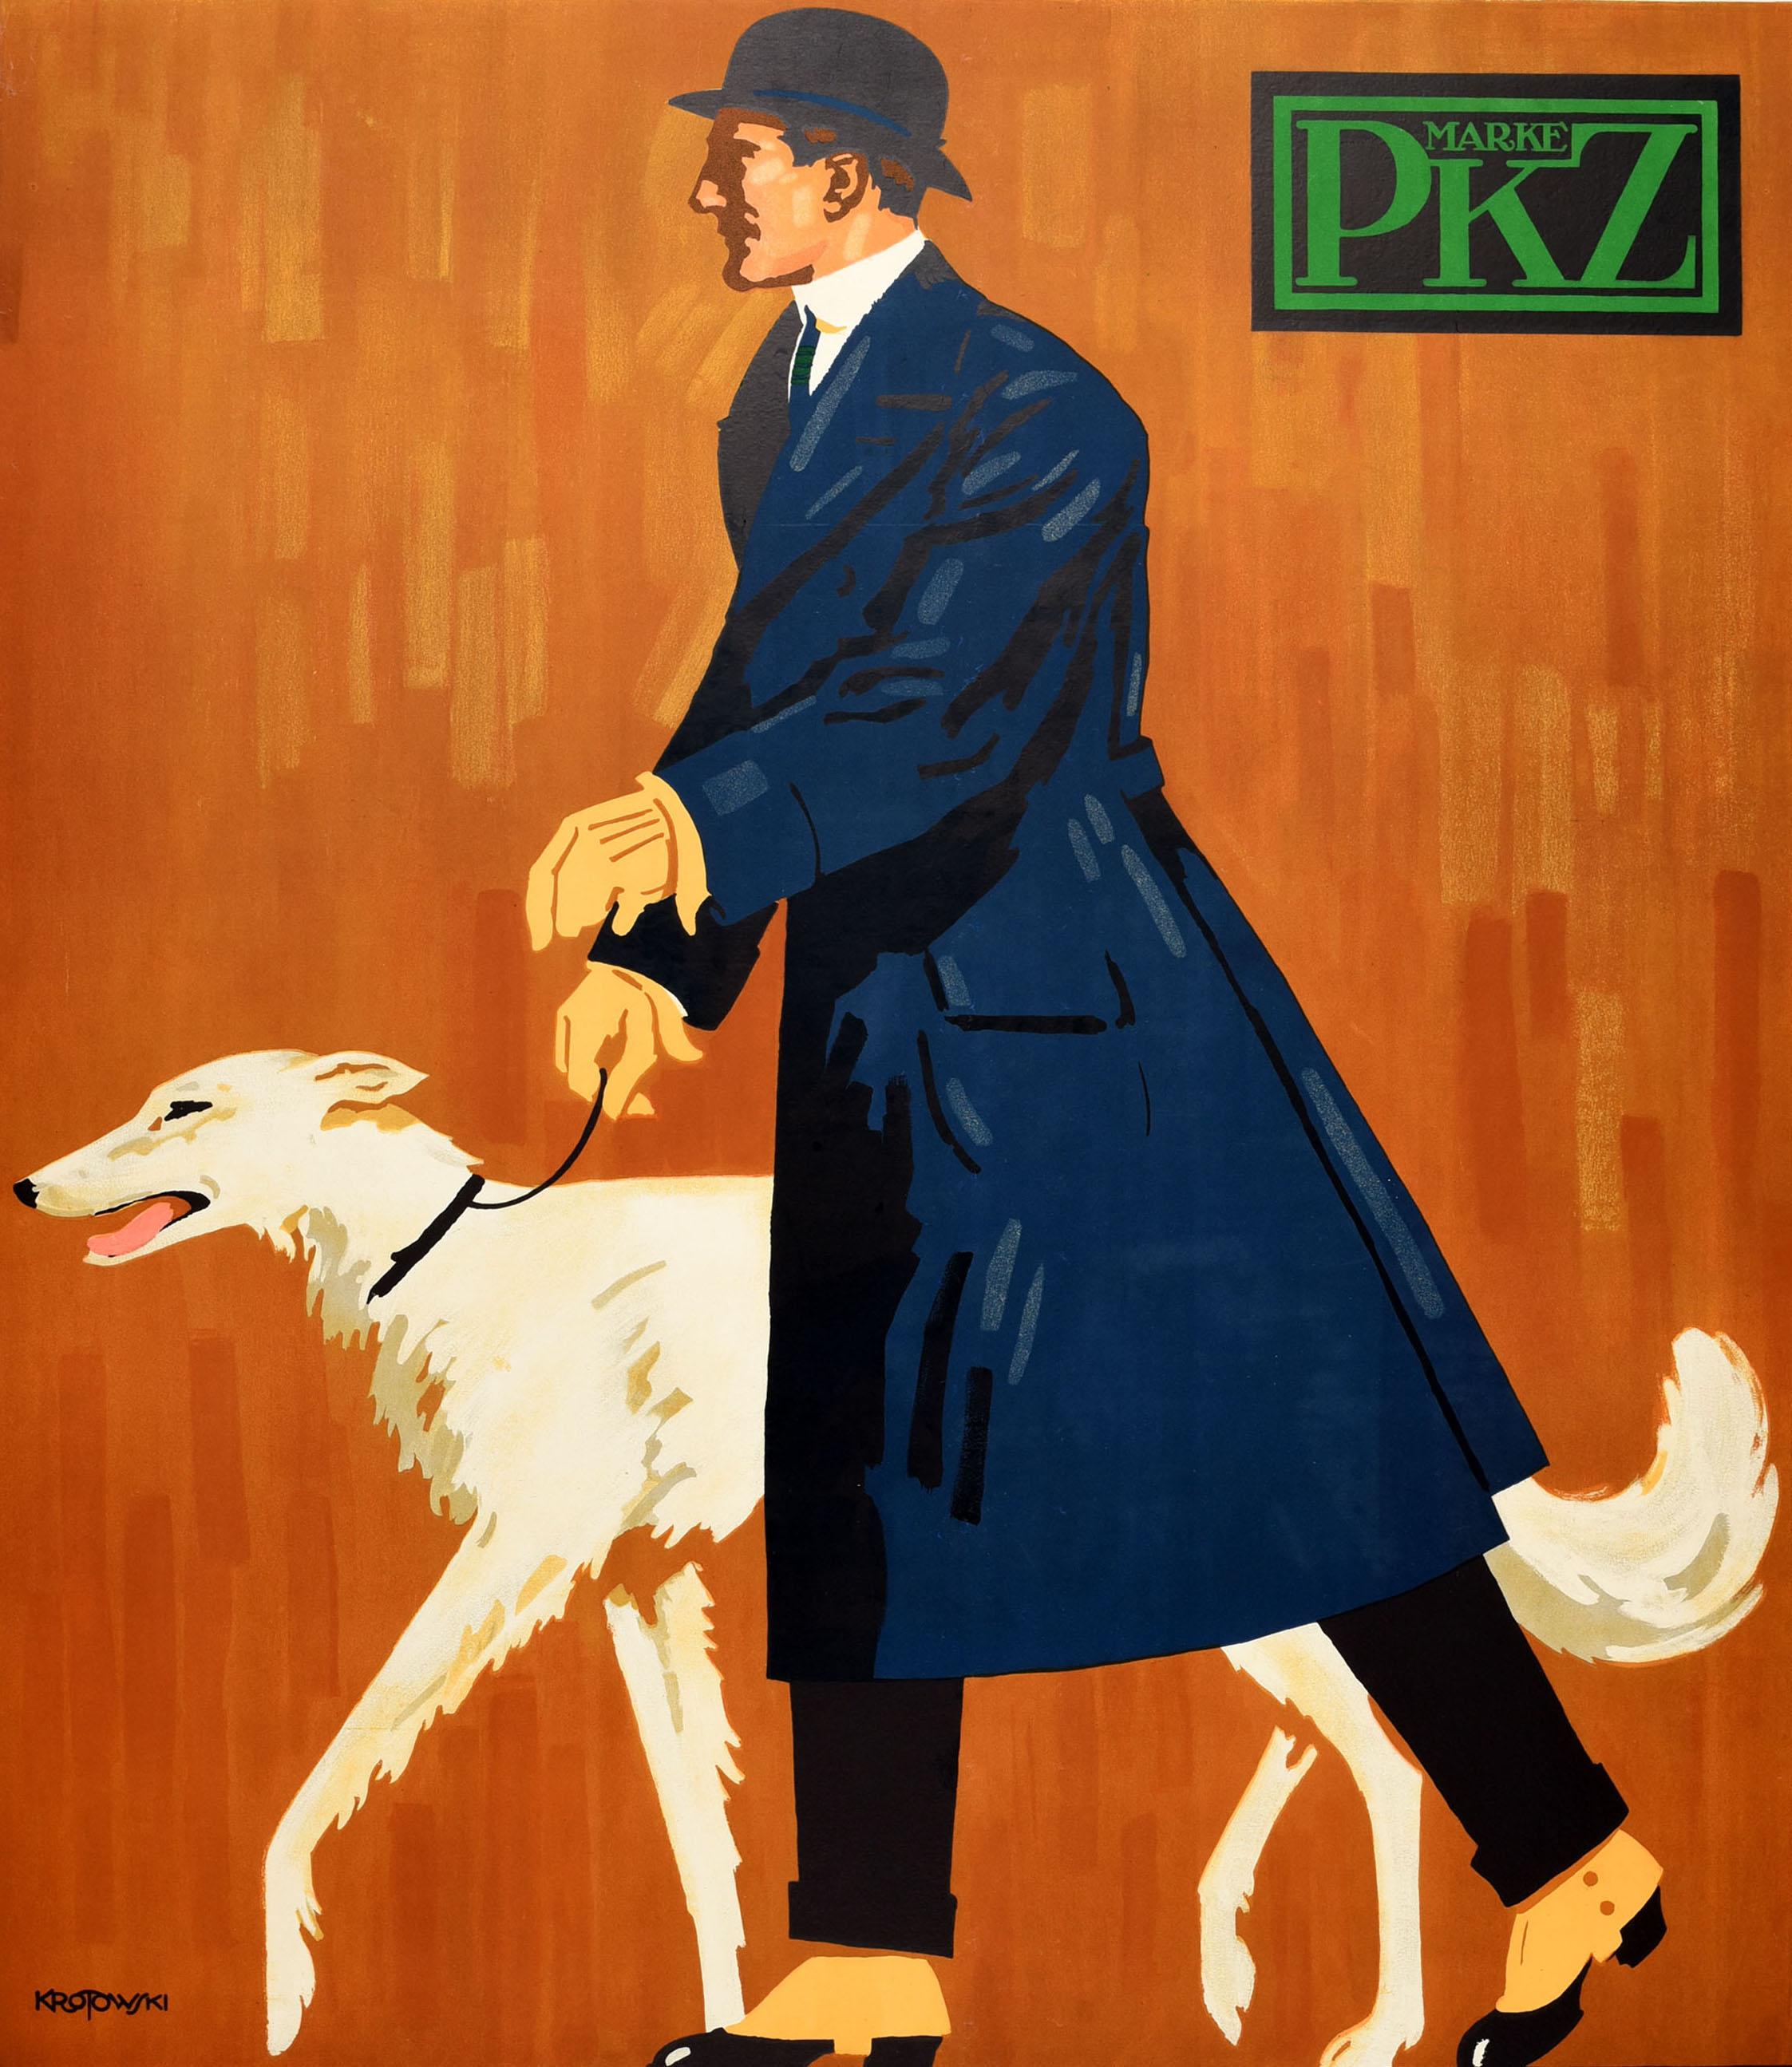 Original antique men's fashion advertising poster for Marke PKZ Burger Kehl & Co features a great design by Stephan Krotowski (1881-1948) depicting a well dressed man wearing a long blue coat over a suit with smart shoes and a hat, walking his dog